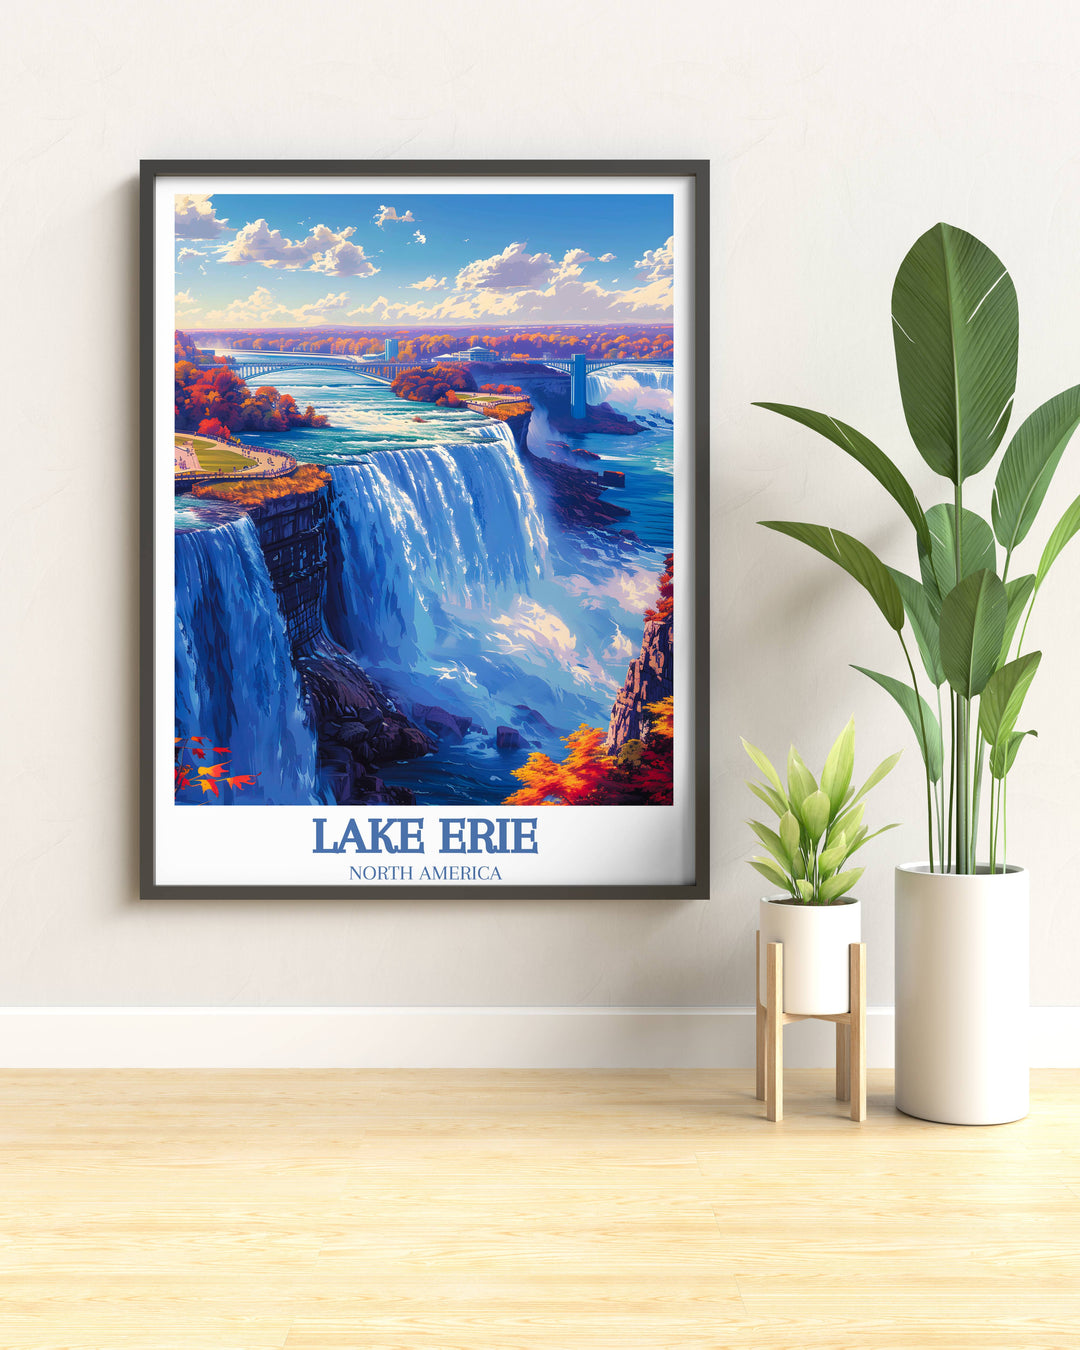 Gift a unique Lake Erie wall art piece, personalize with a message for a special anniversary or birthday surprise.